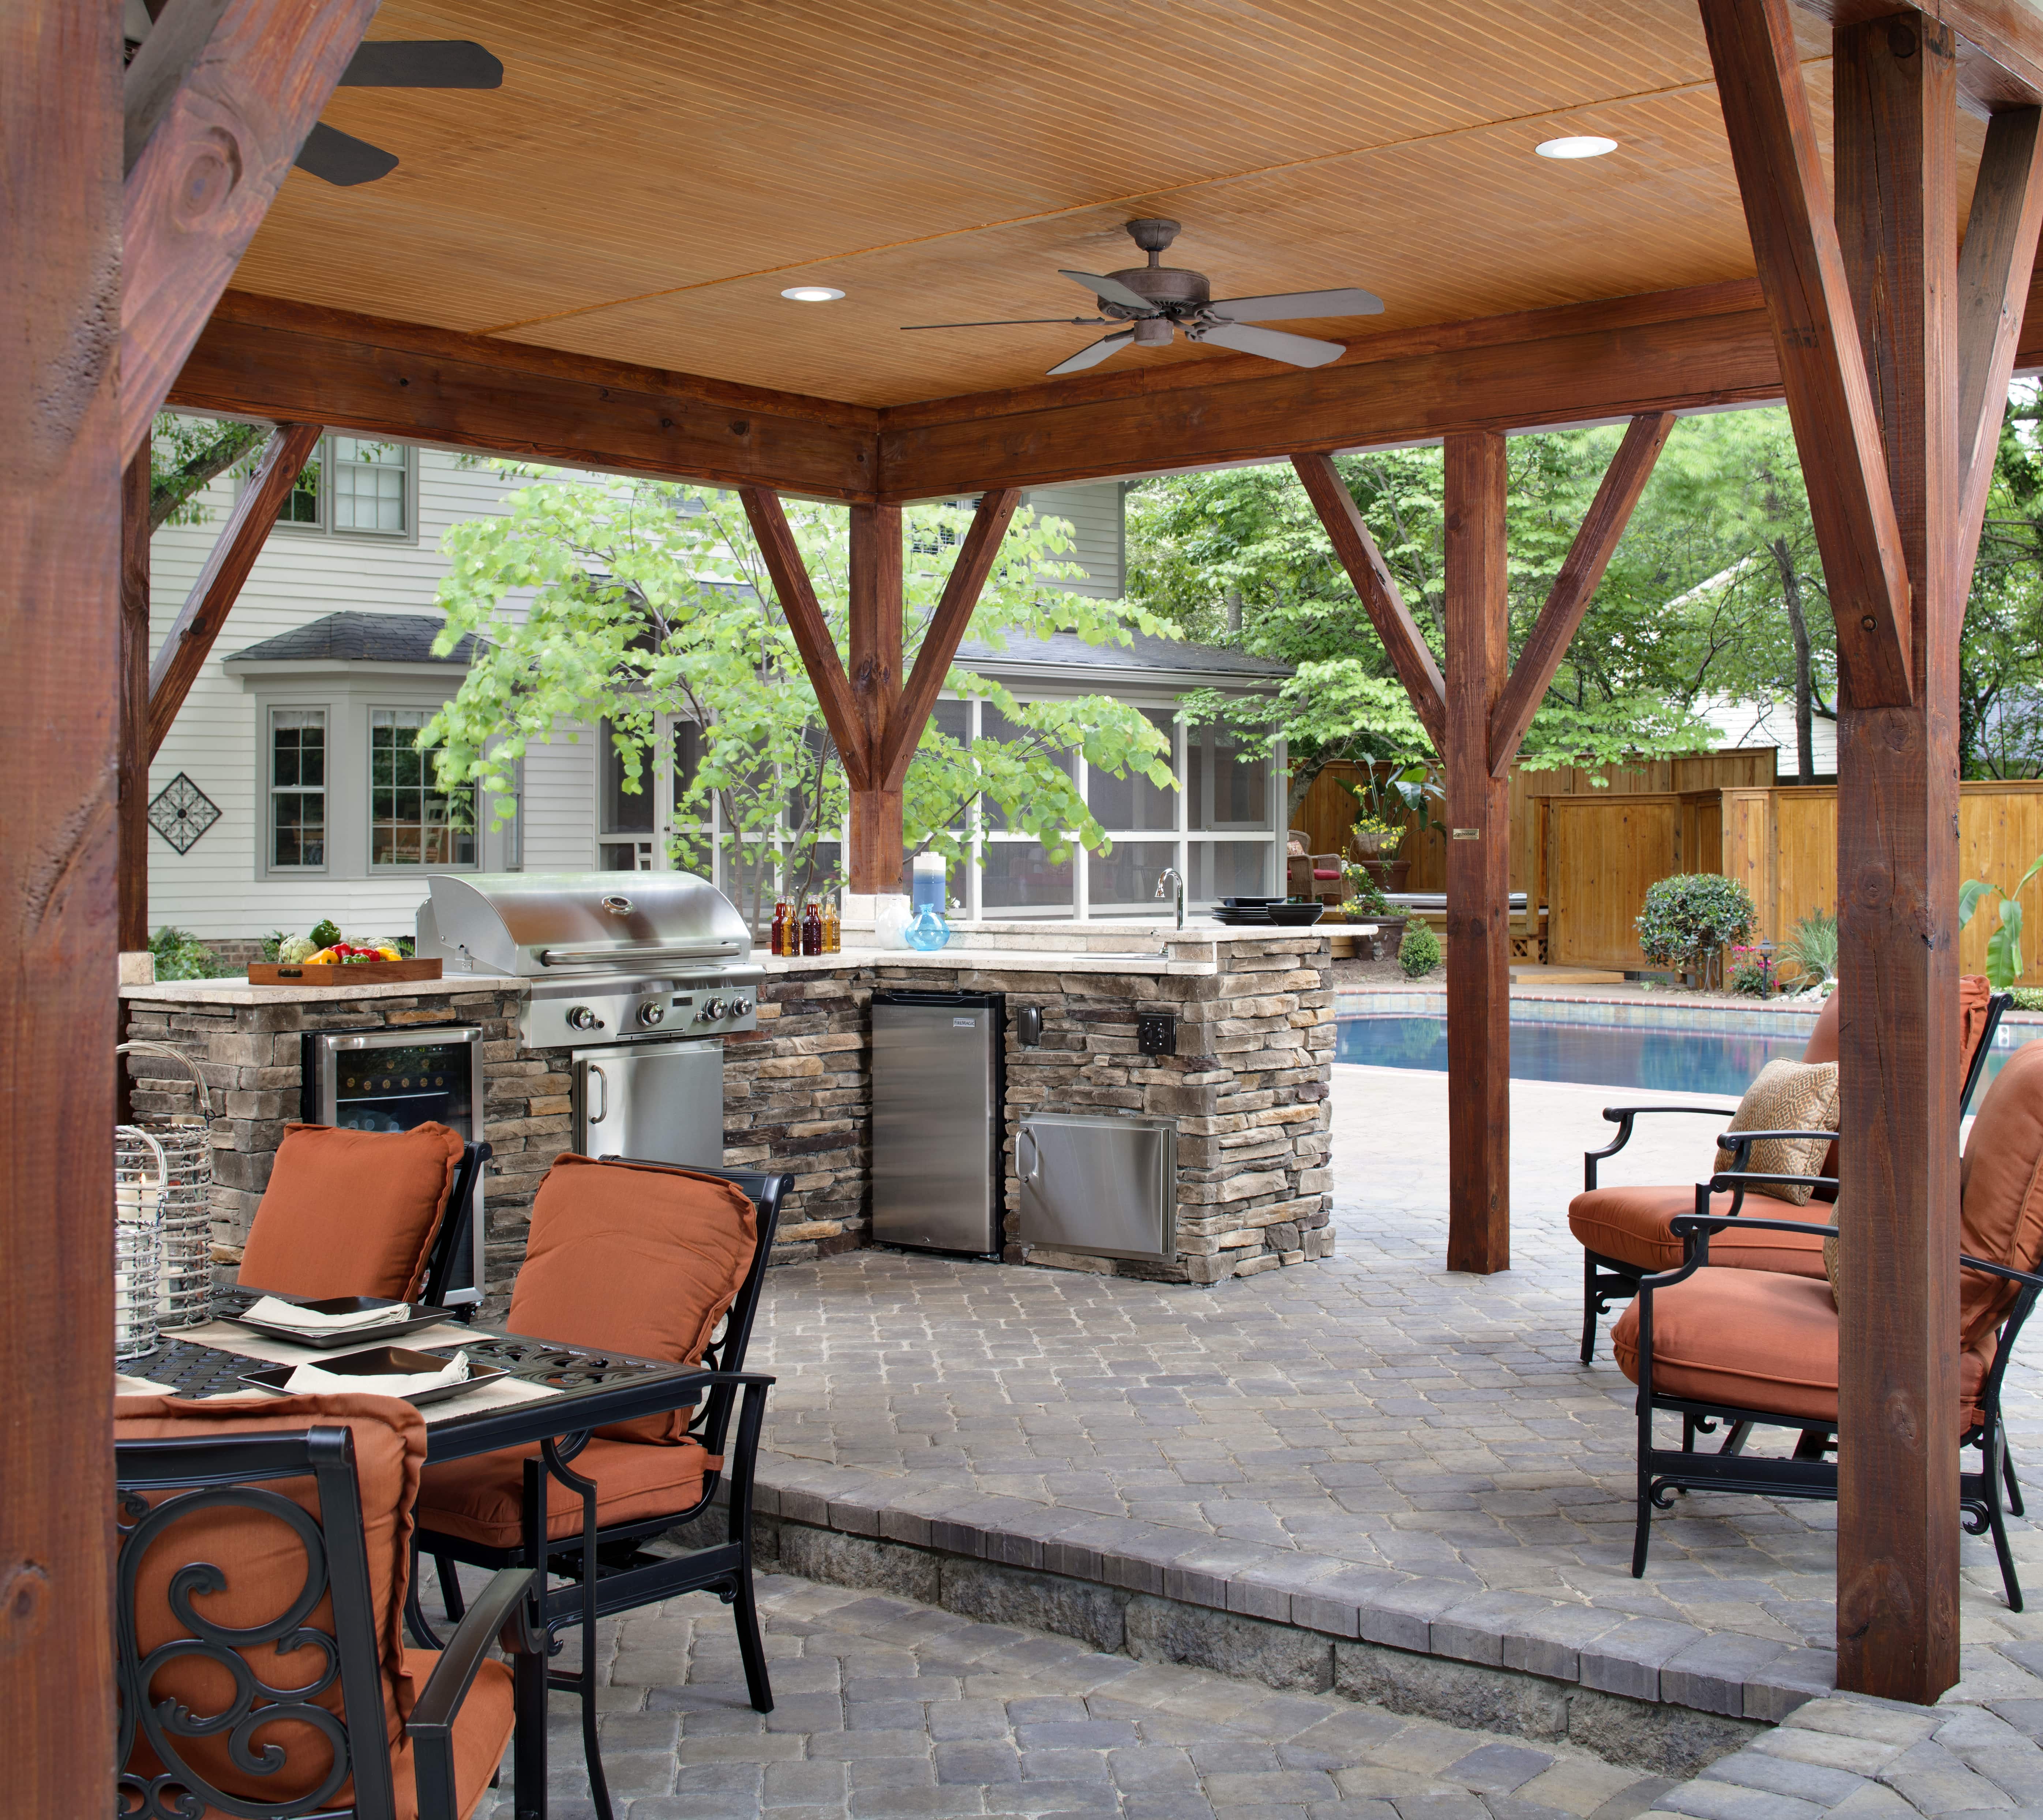 Outdoor living space with outdoor kitchen feature